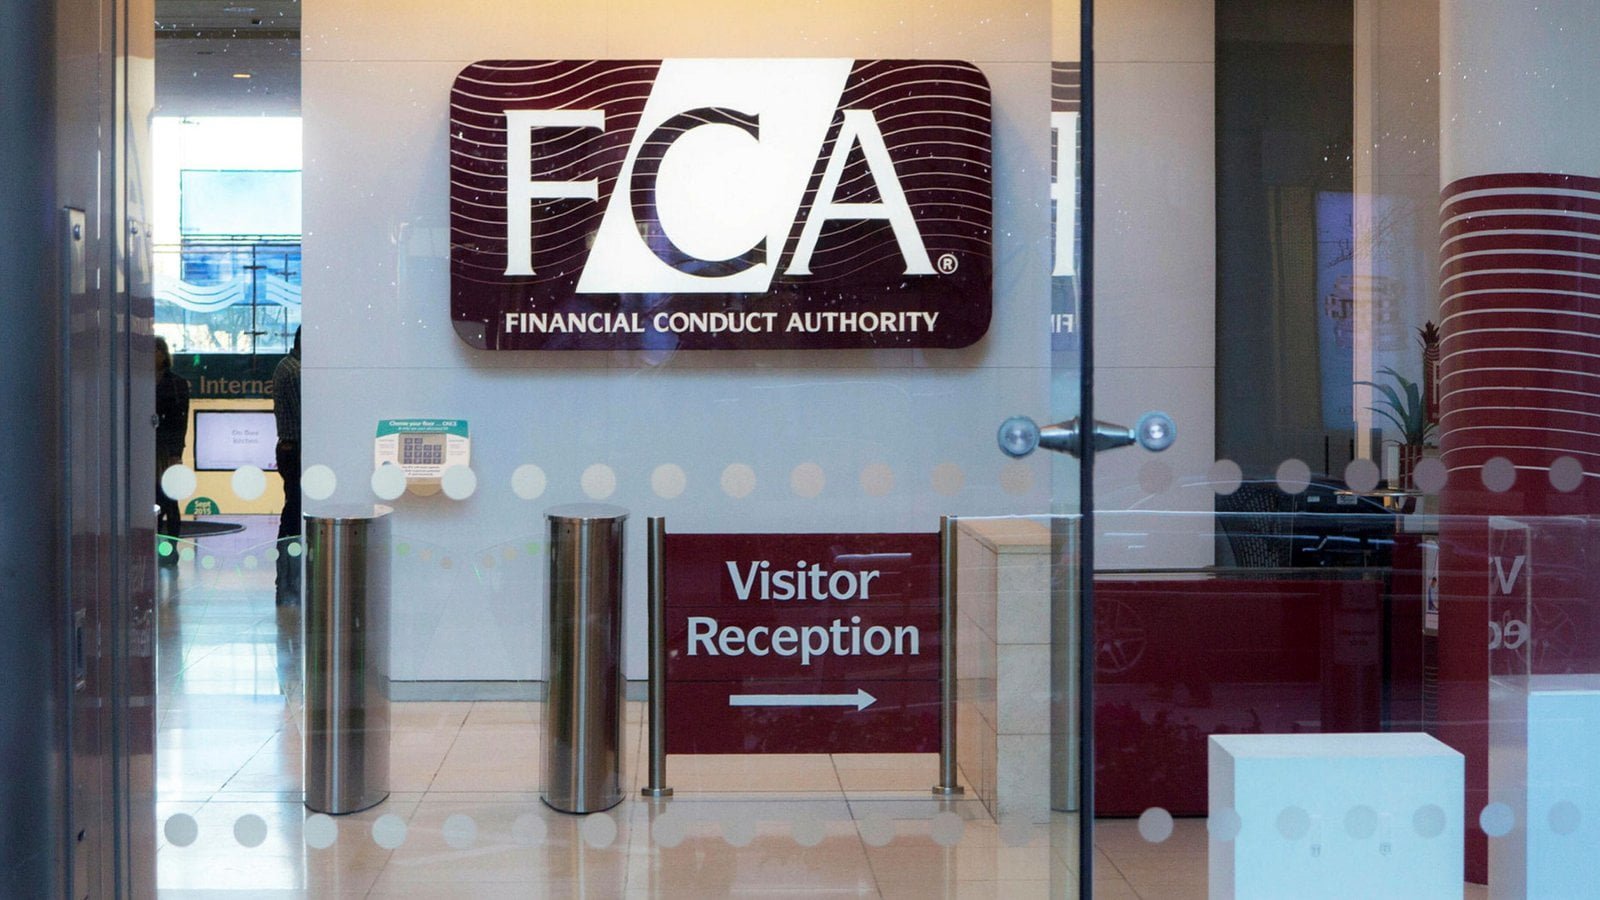 uk-regulator-warns-crypto-exchange-ftx-is-providing-services-without-authorization